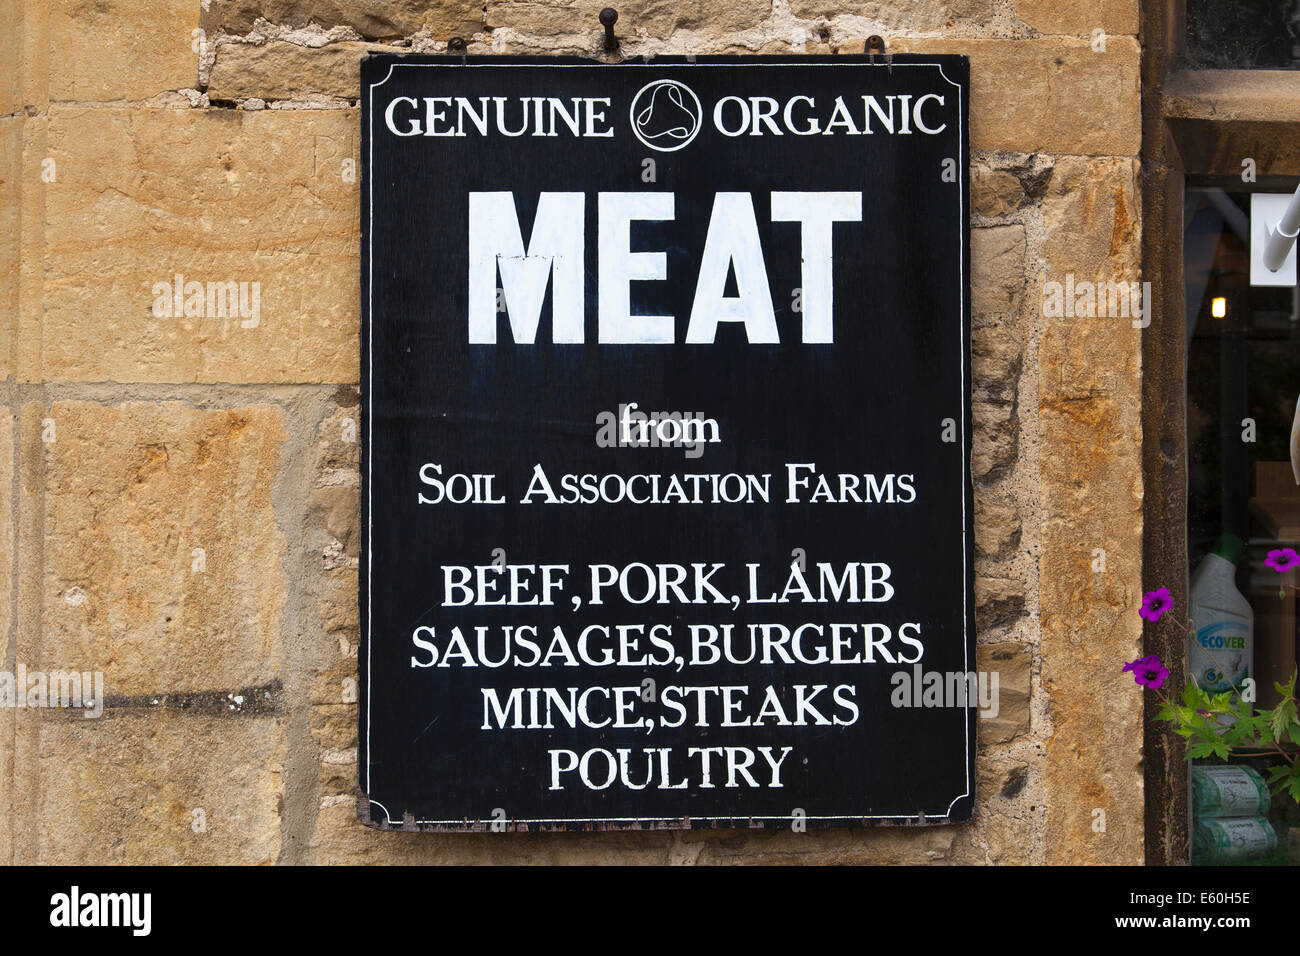 Organic meat & poultry for sale at a butcher's shop in the U.K. Stock Photo